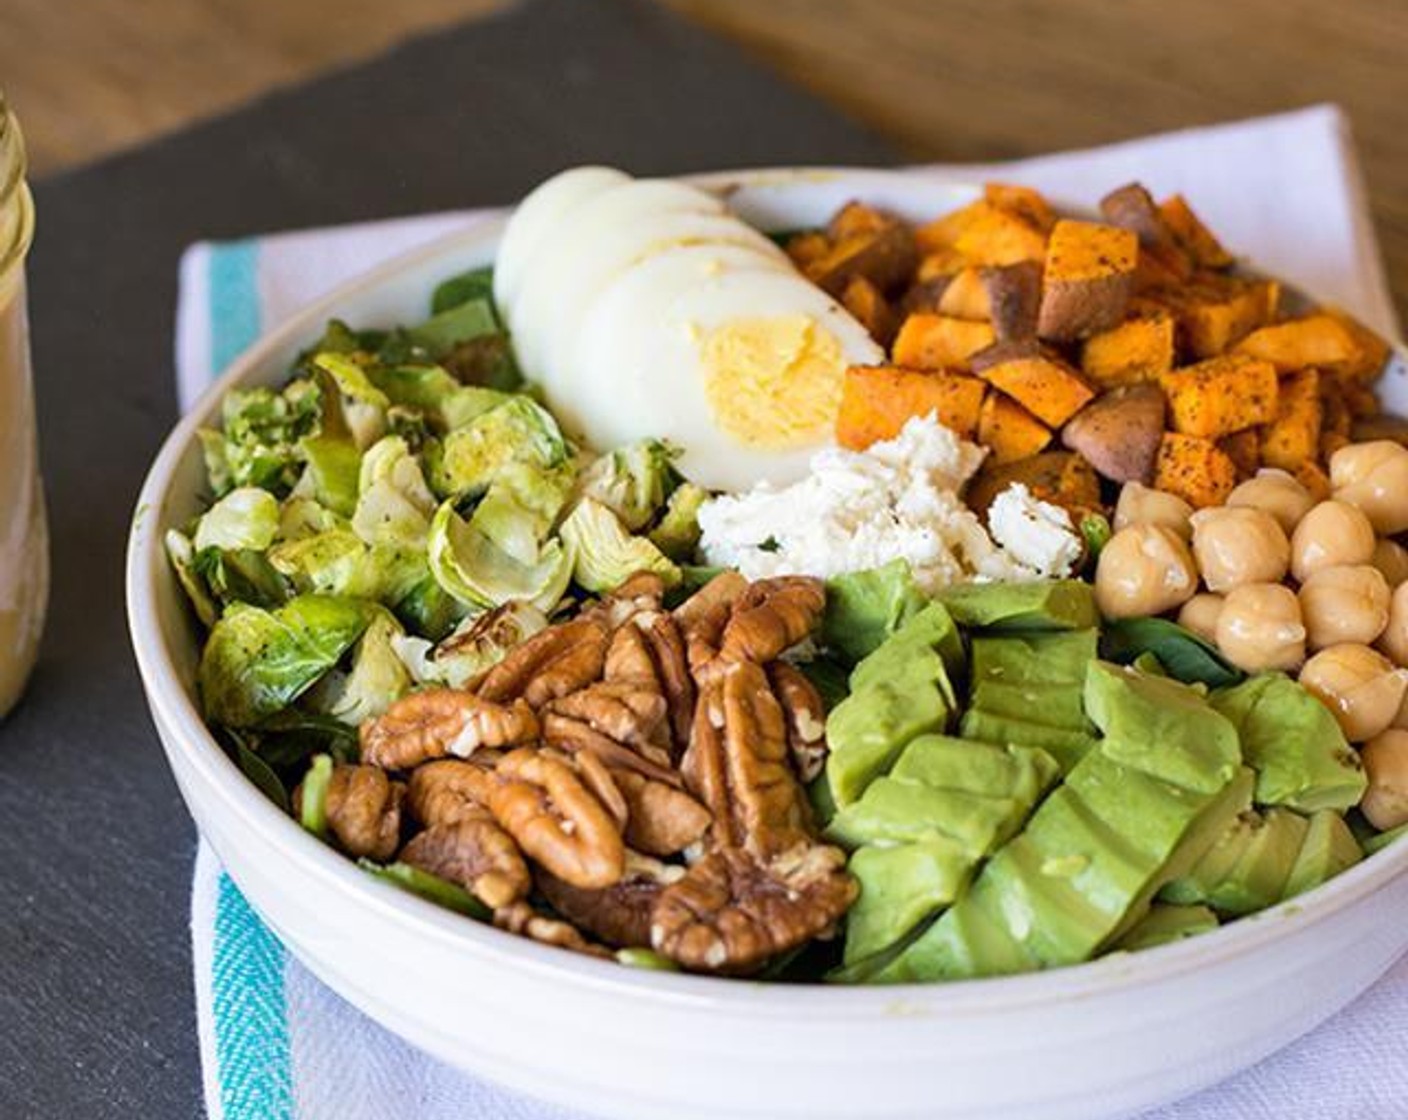 Green Powerhouse Salad with Roasted Vegetables